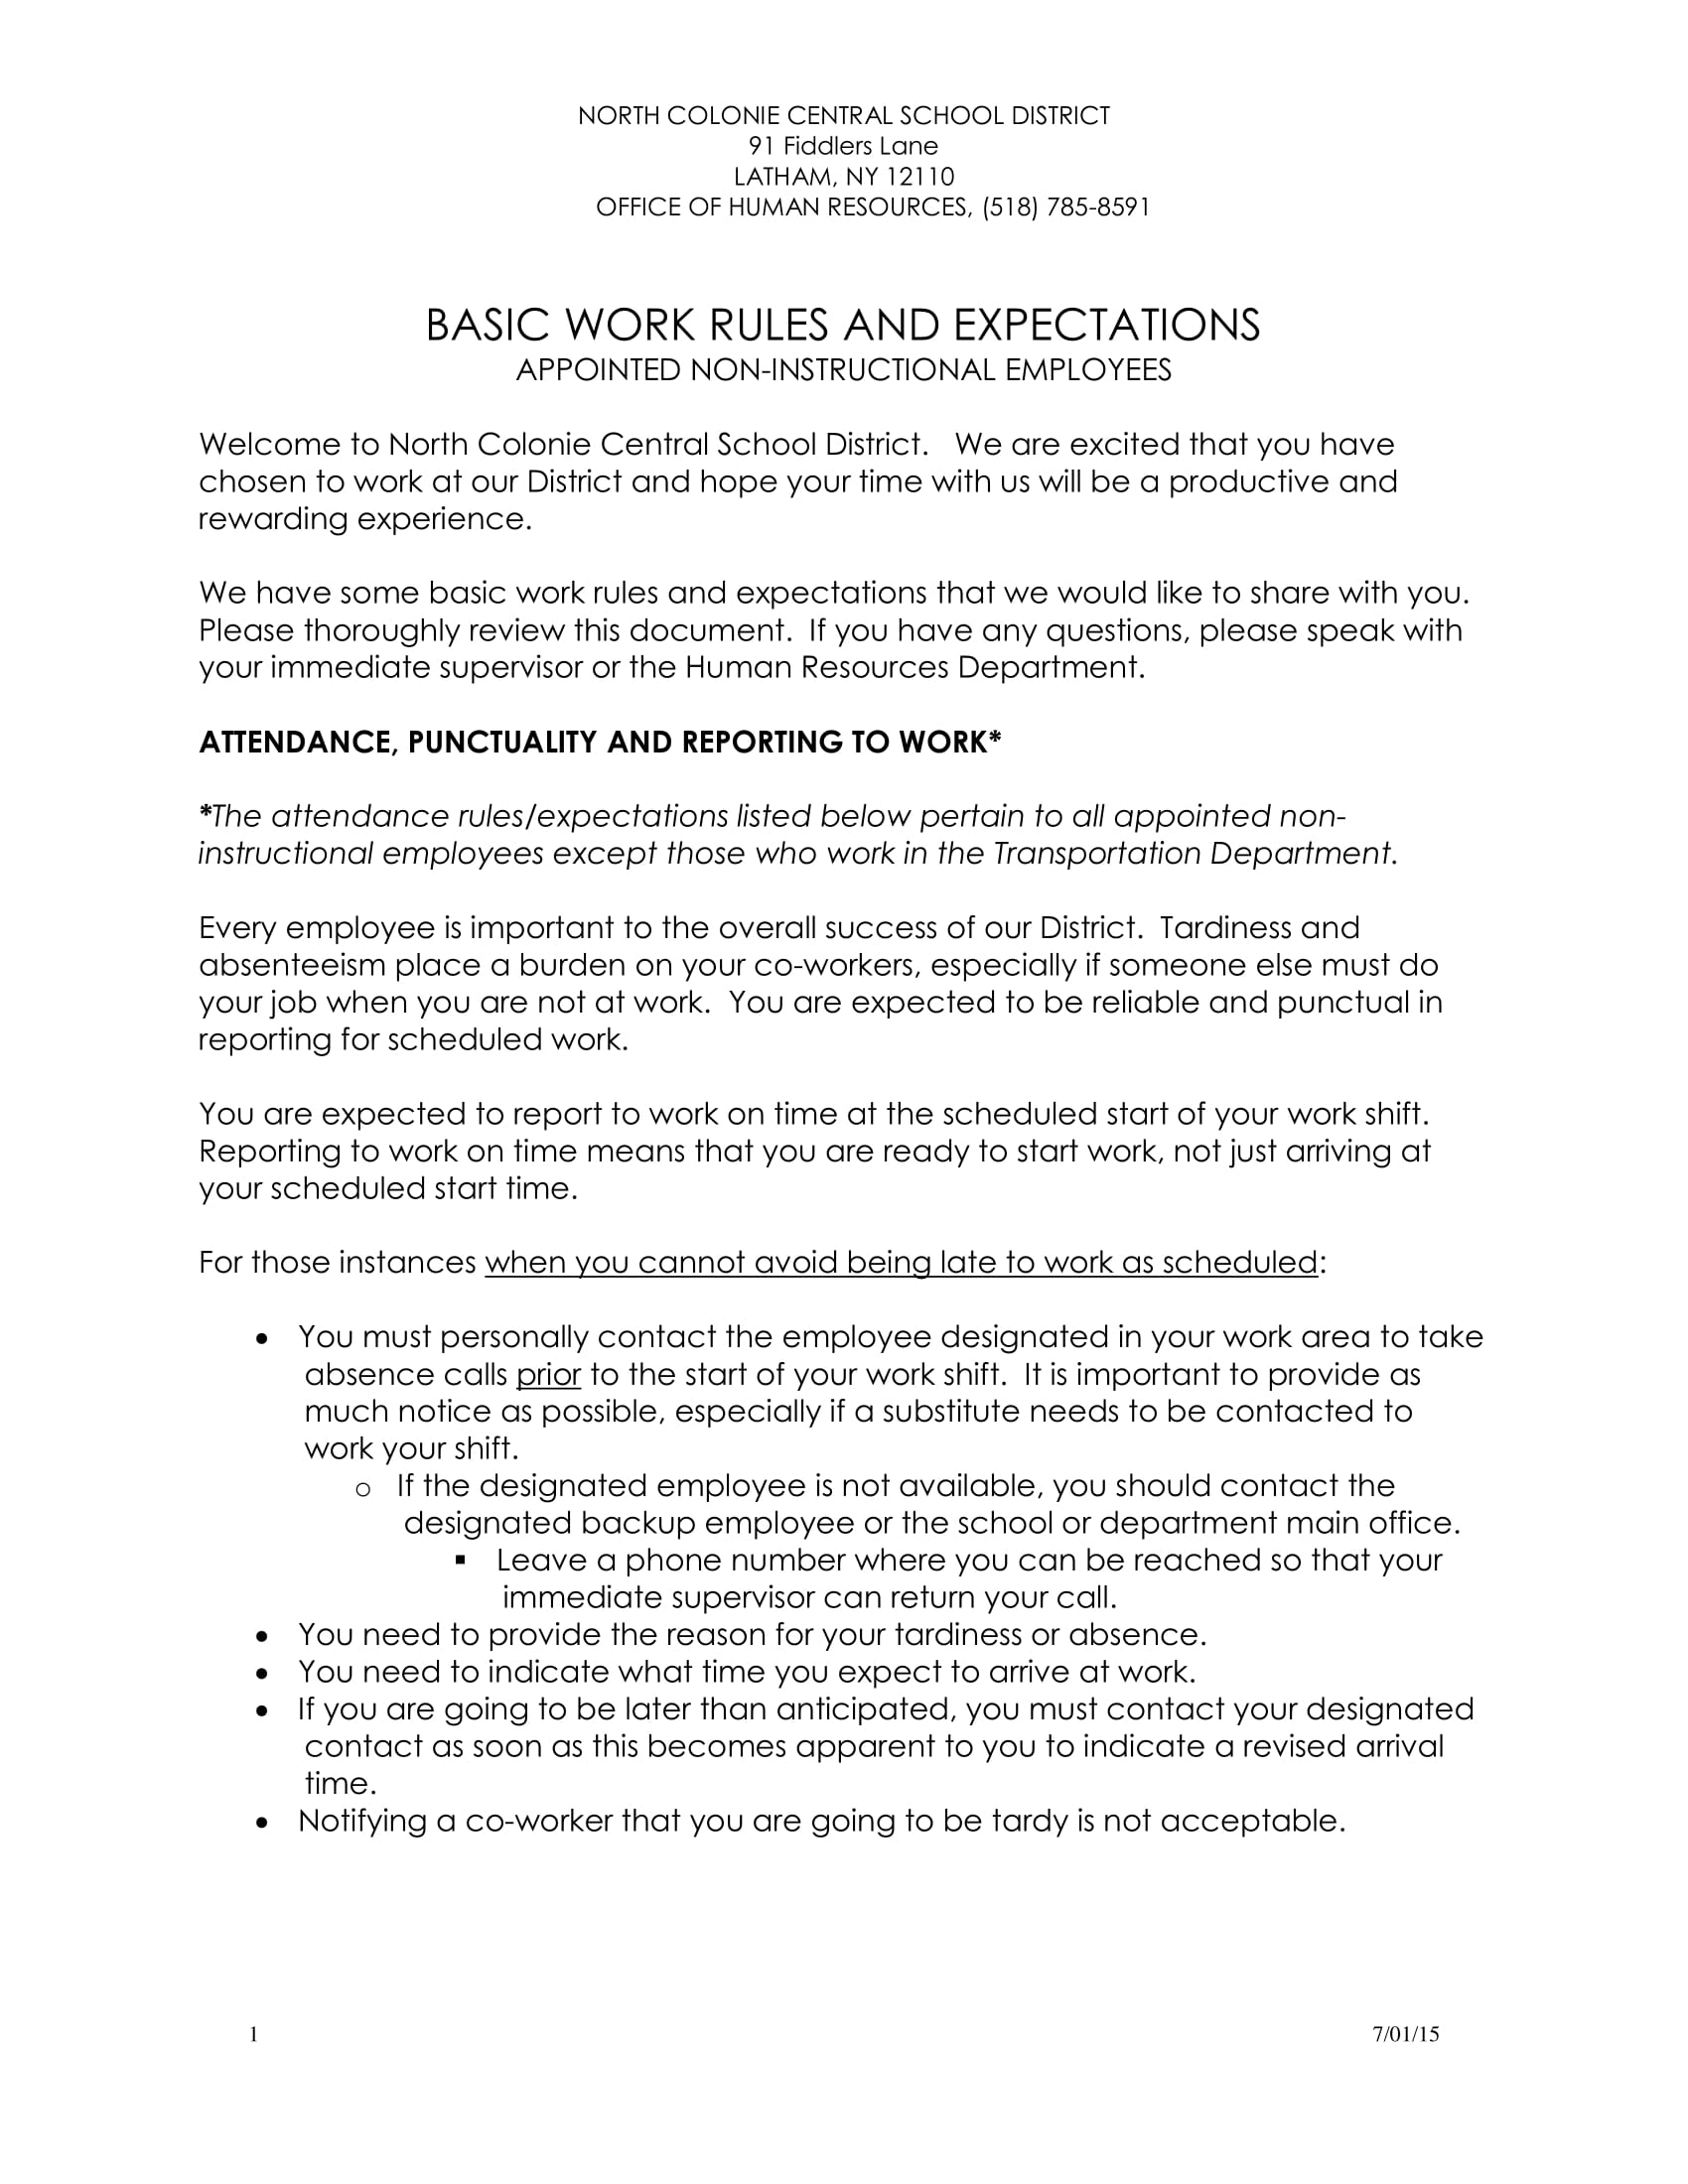 basic employee work rules and expectations